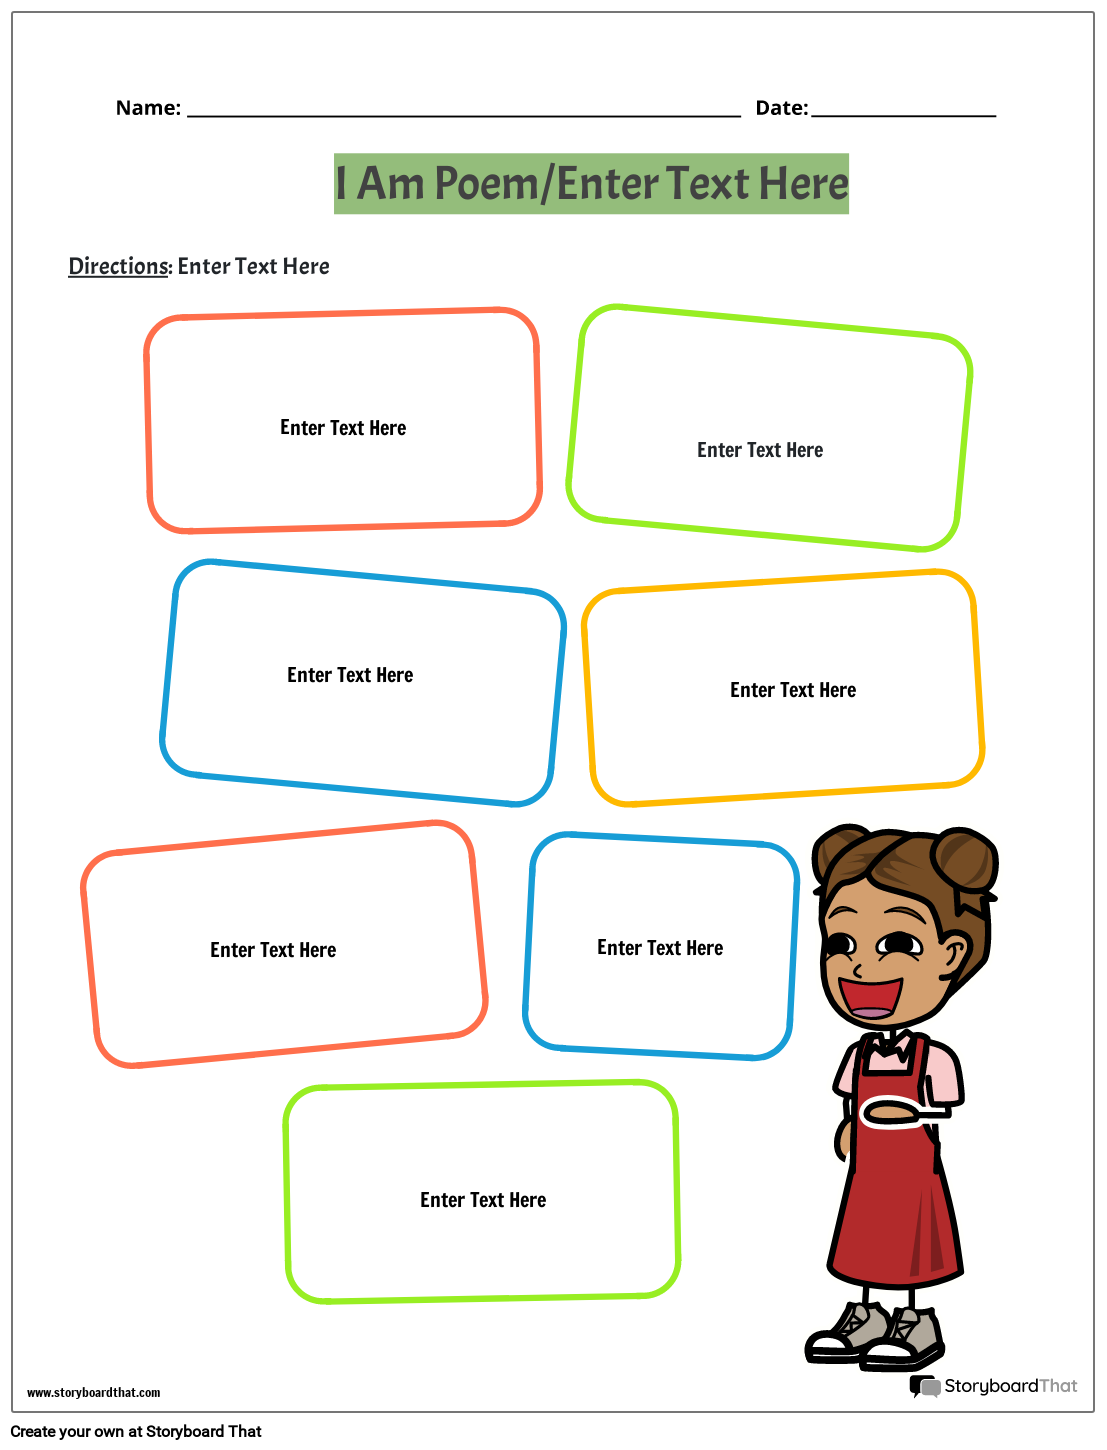 All about me poem template